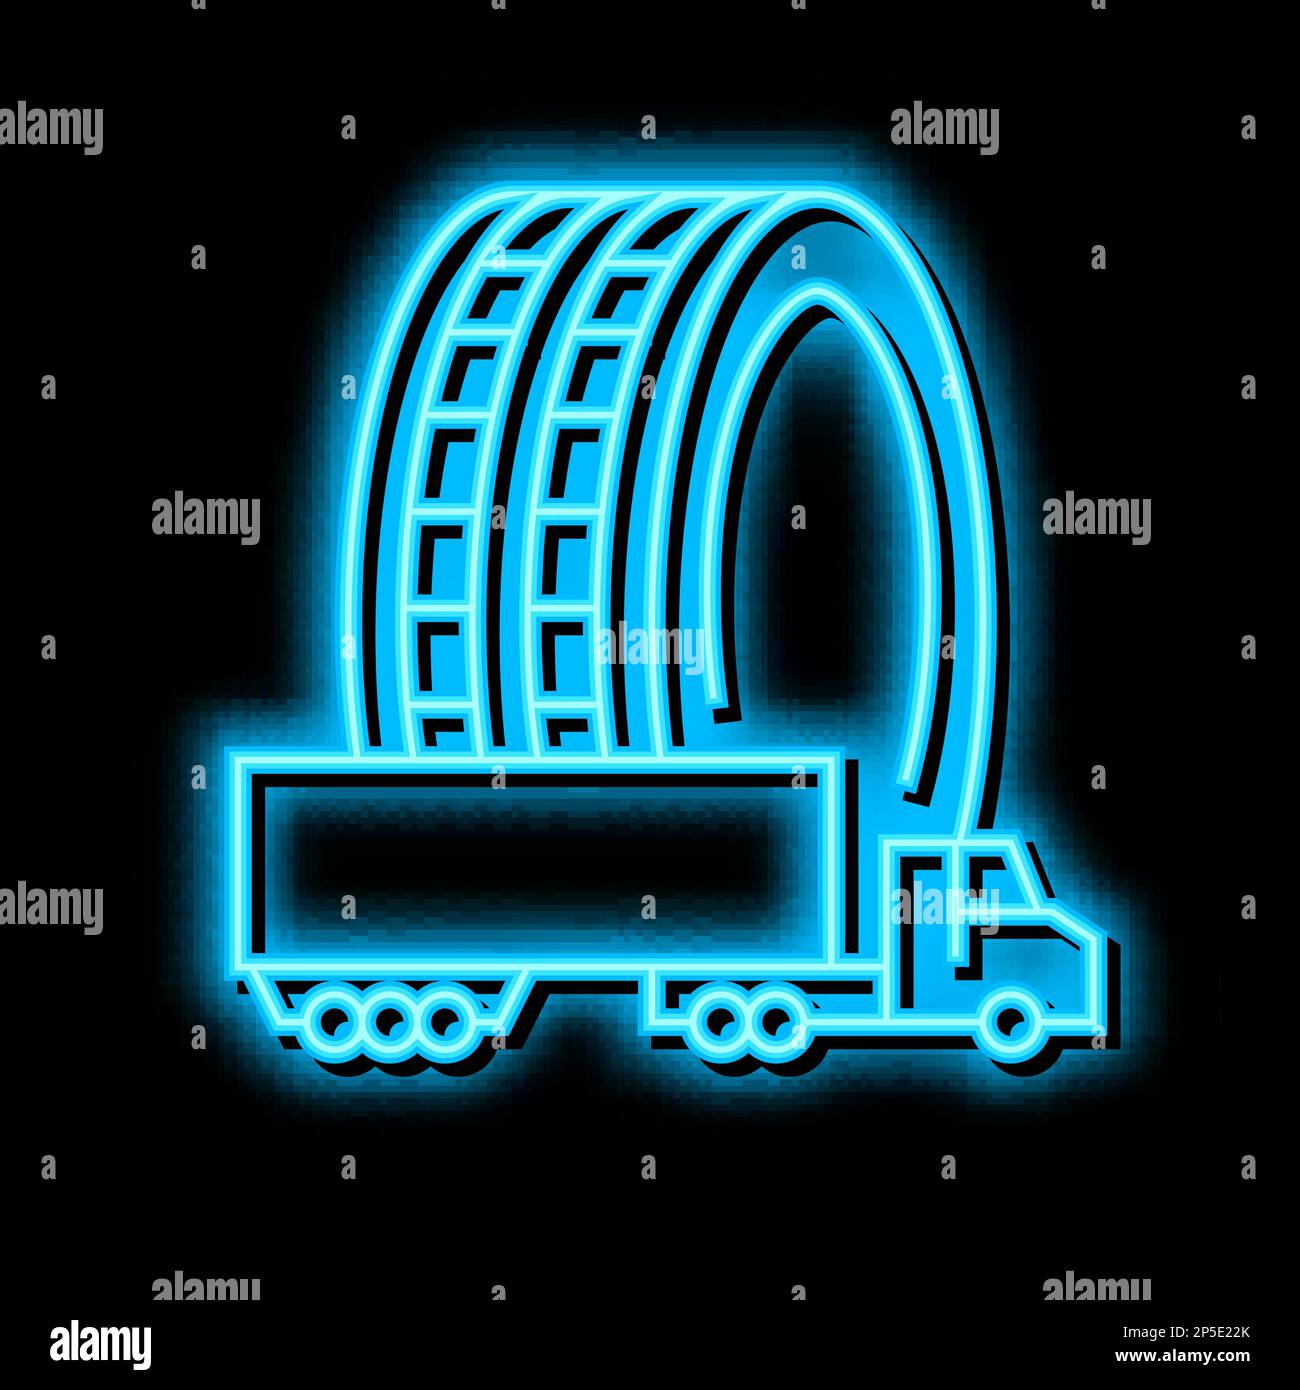 commercial truck tires neon glow icon illustration Stock Vector